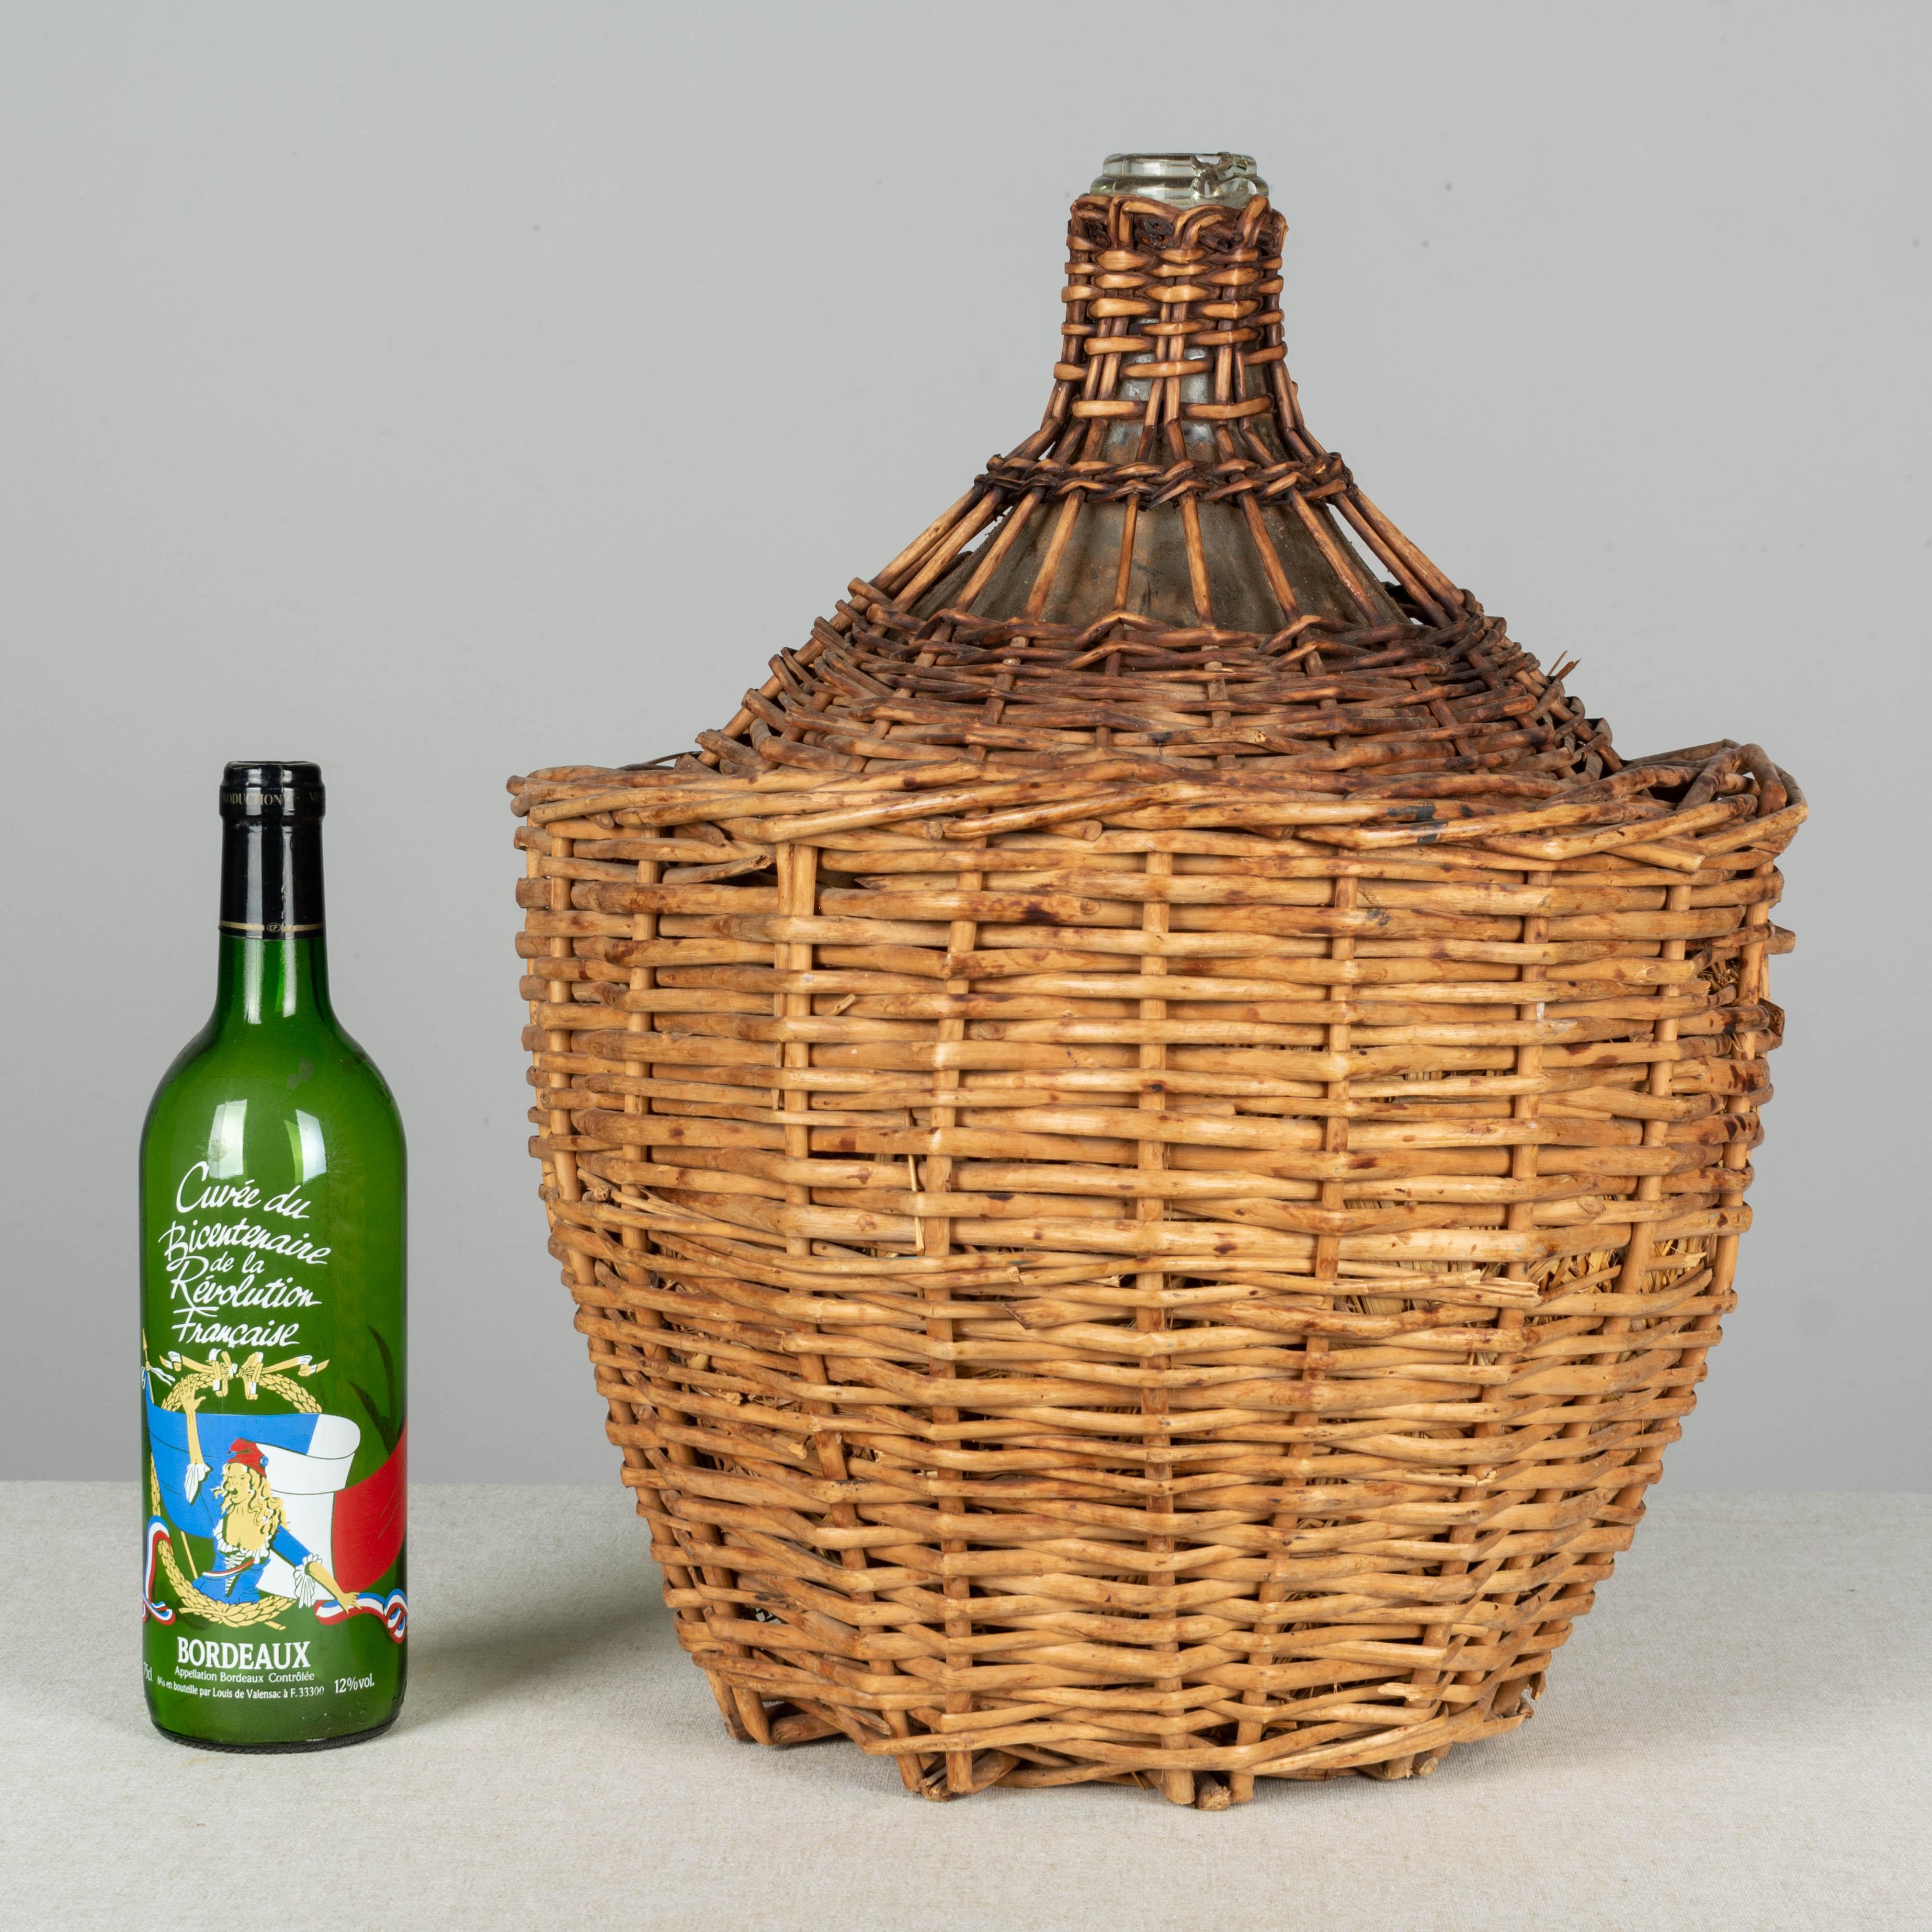 A large French globular form glass dame Jeanne, or demijohn bottle enclosed in a woven wicker basket lined with straw. Small chip to mouth of bottle.